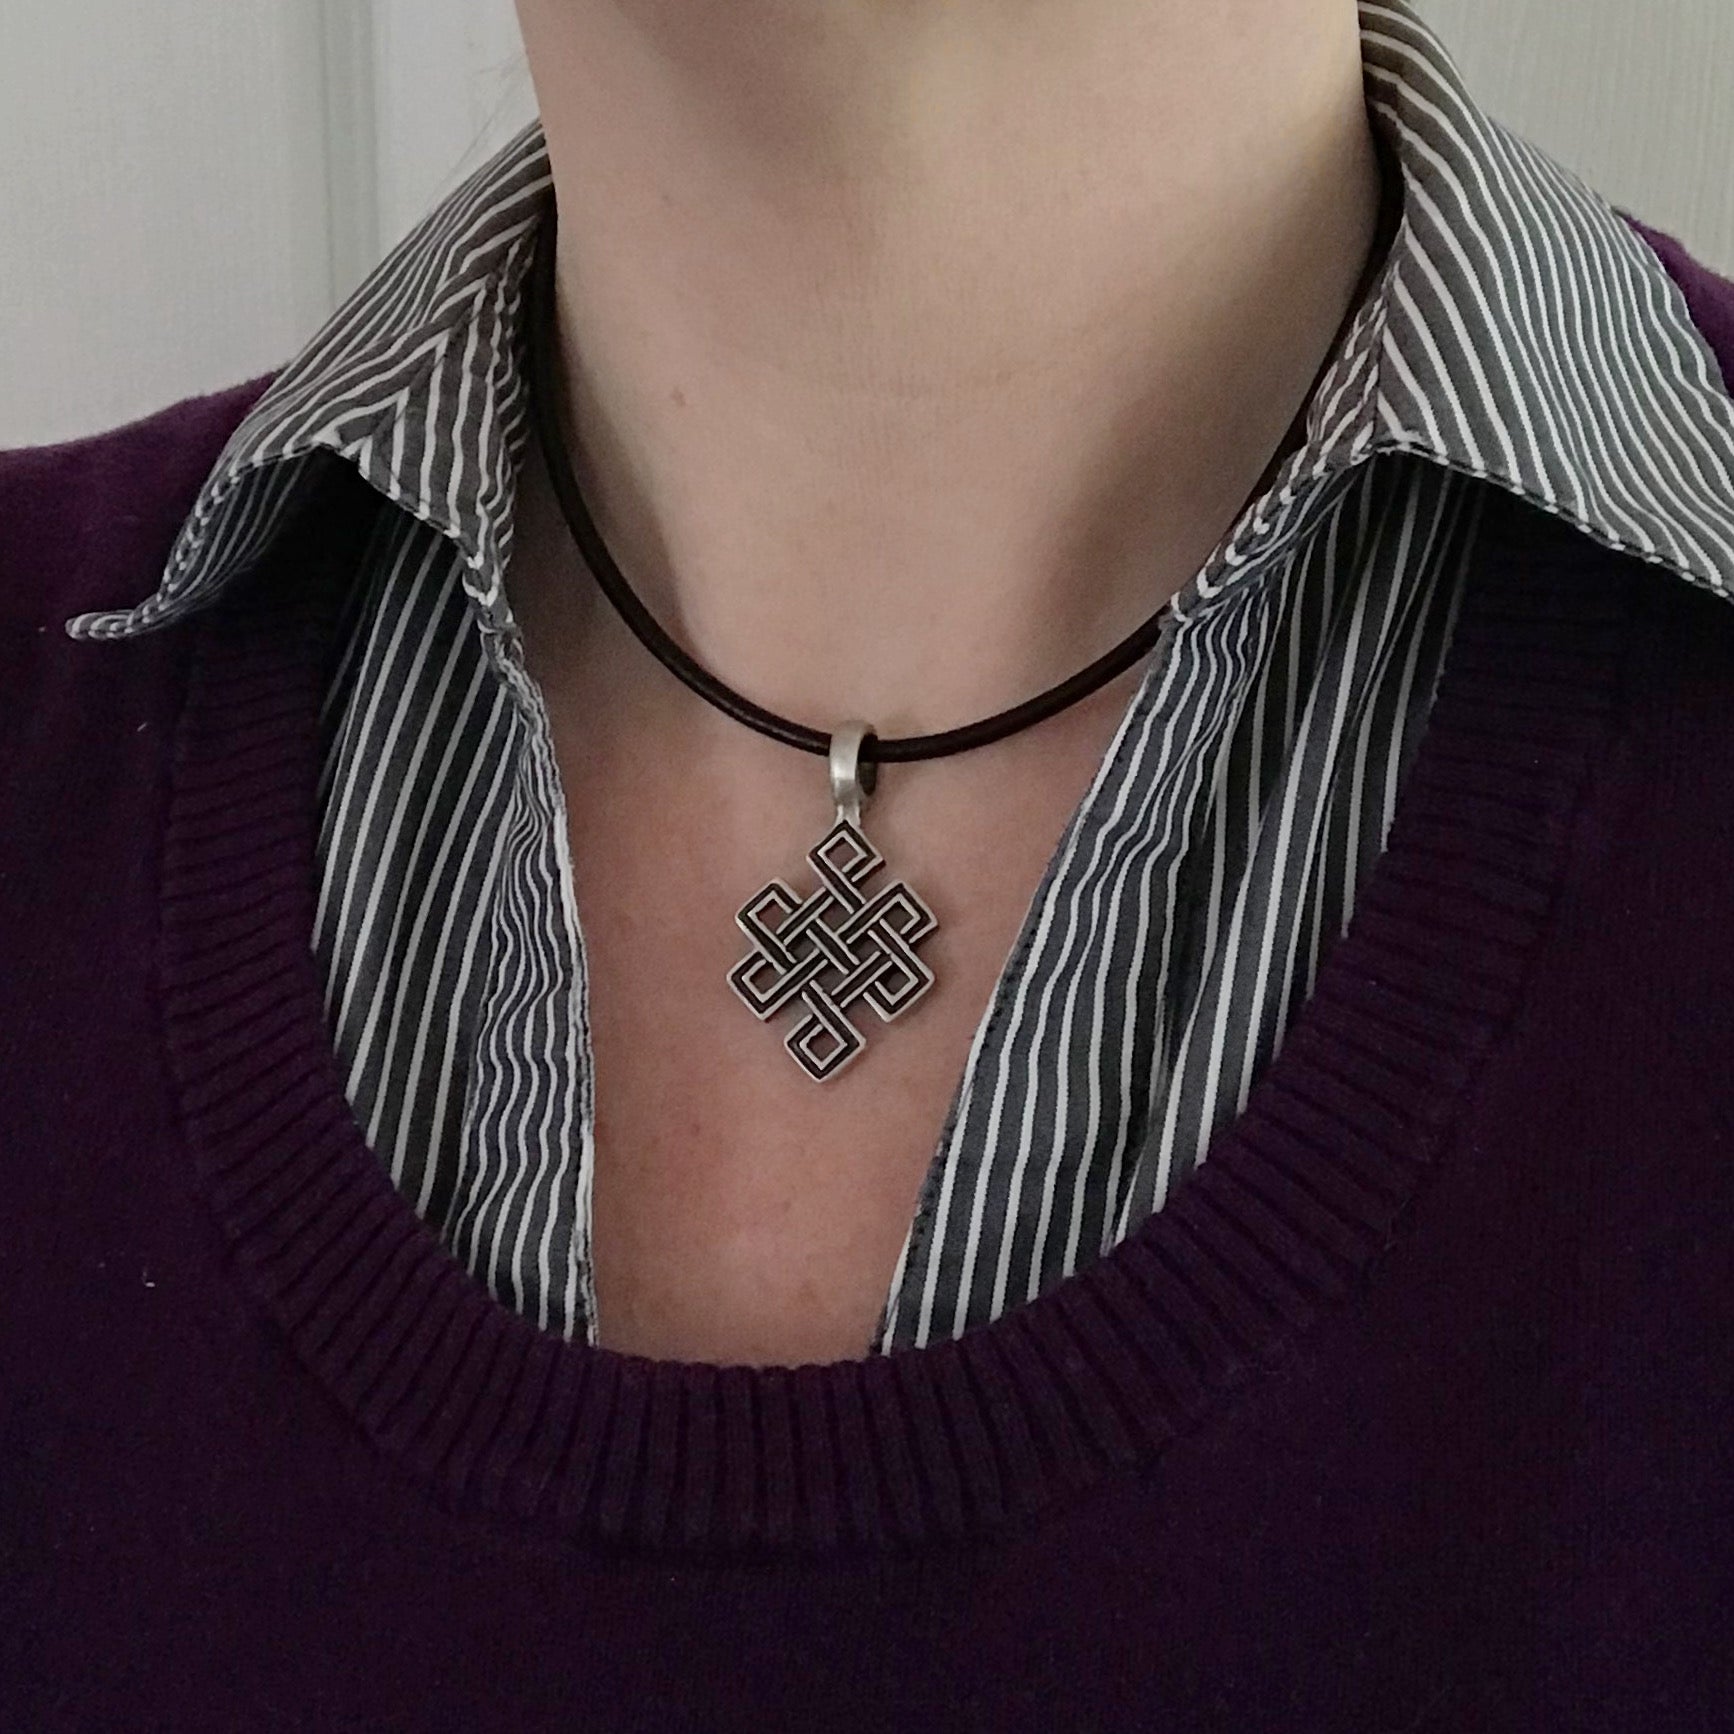 Vintage Celtic Cross Necklace – Meanwhile In Ireland Shop